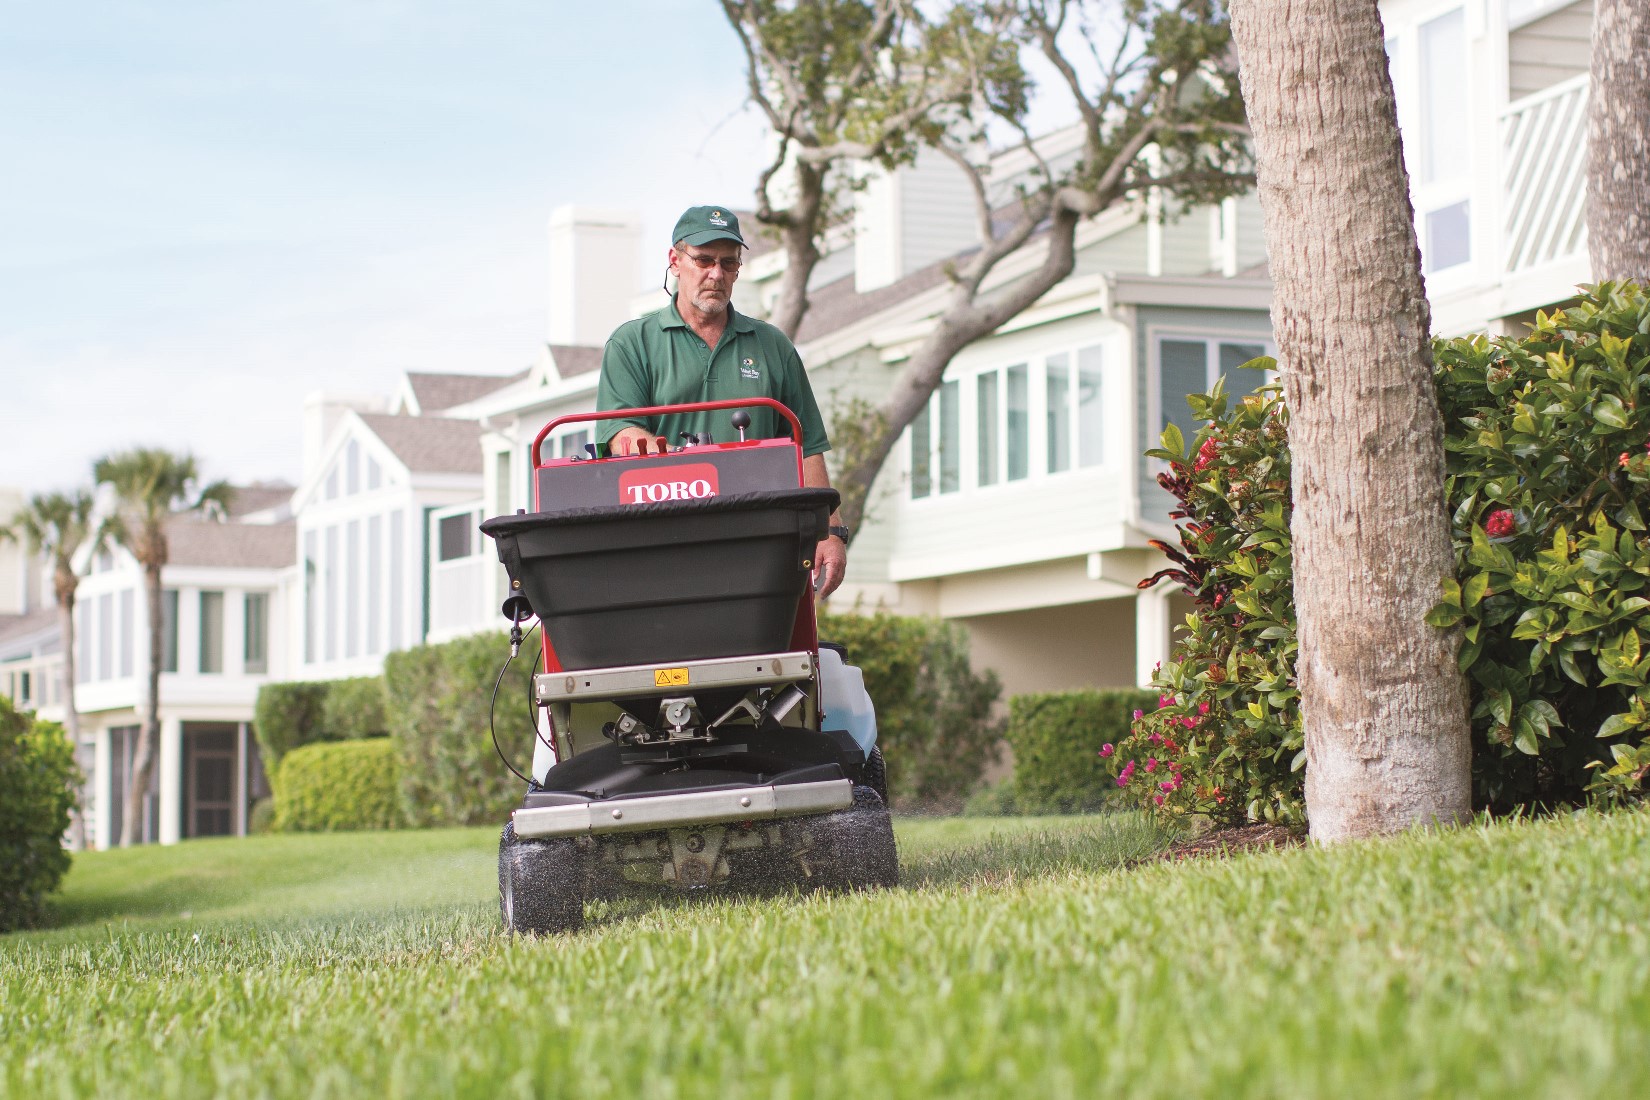 Turf Renovation made easy with the Toro Stand-on Spreader Sprayer